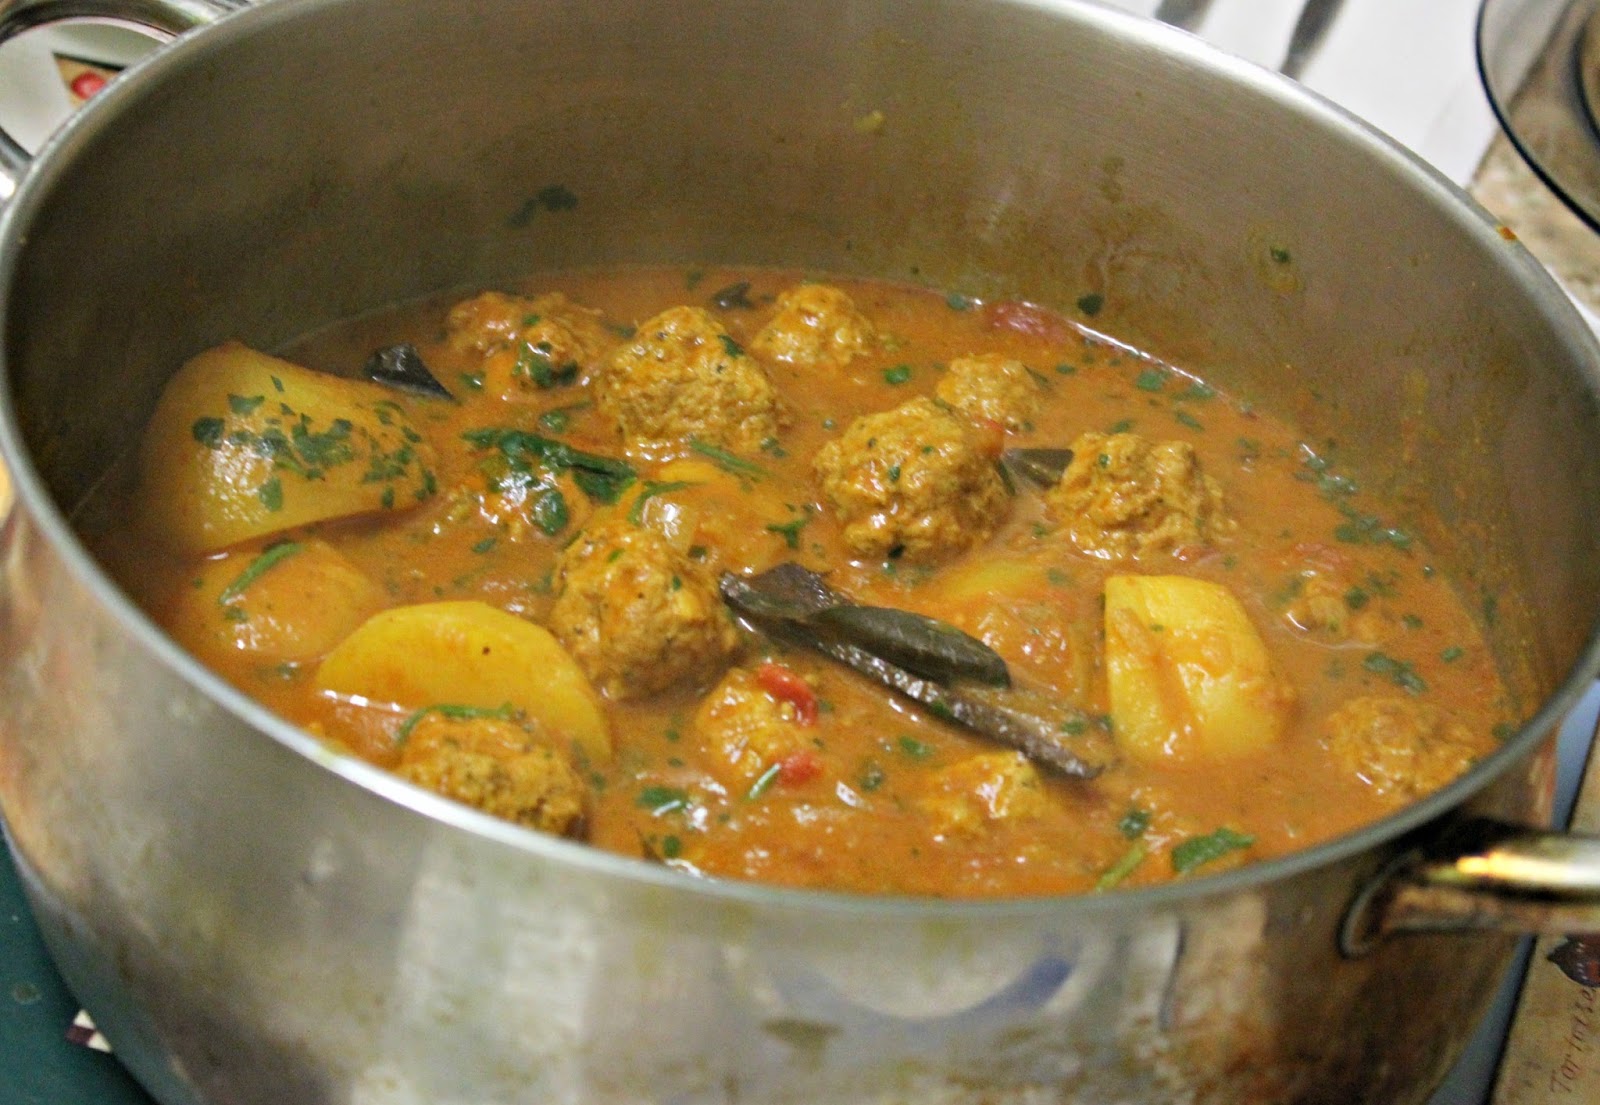 A picture of the meatball curry